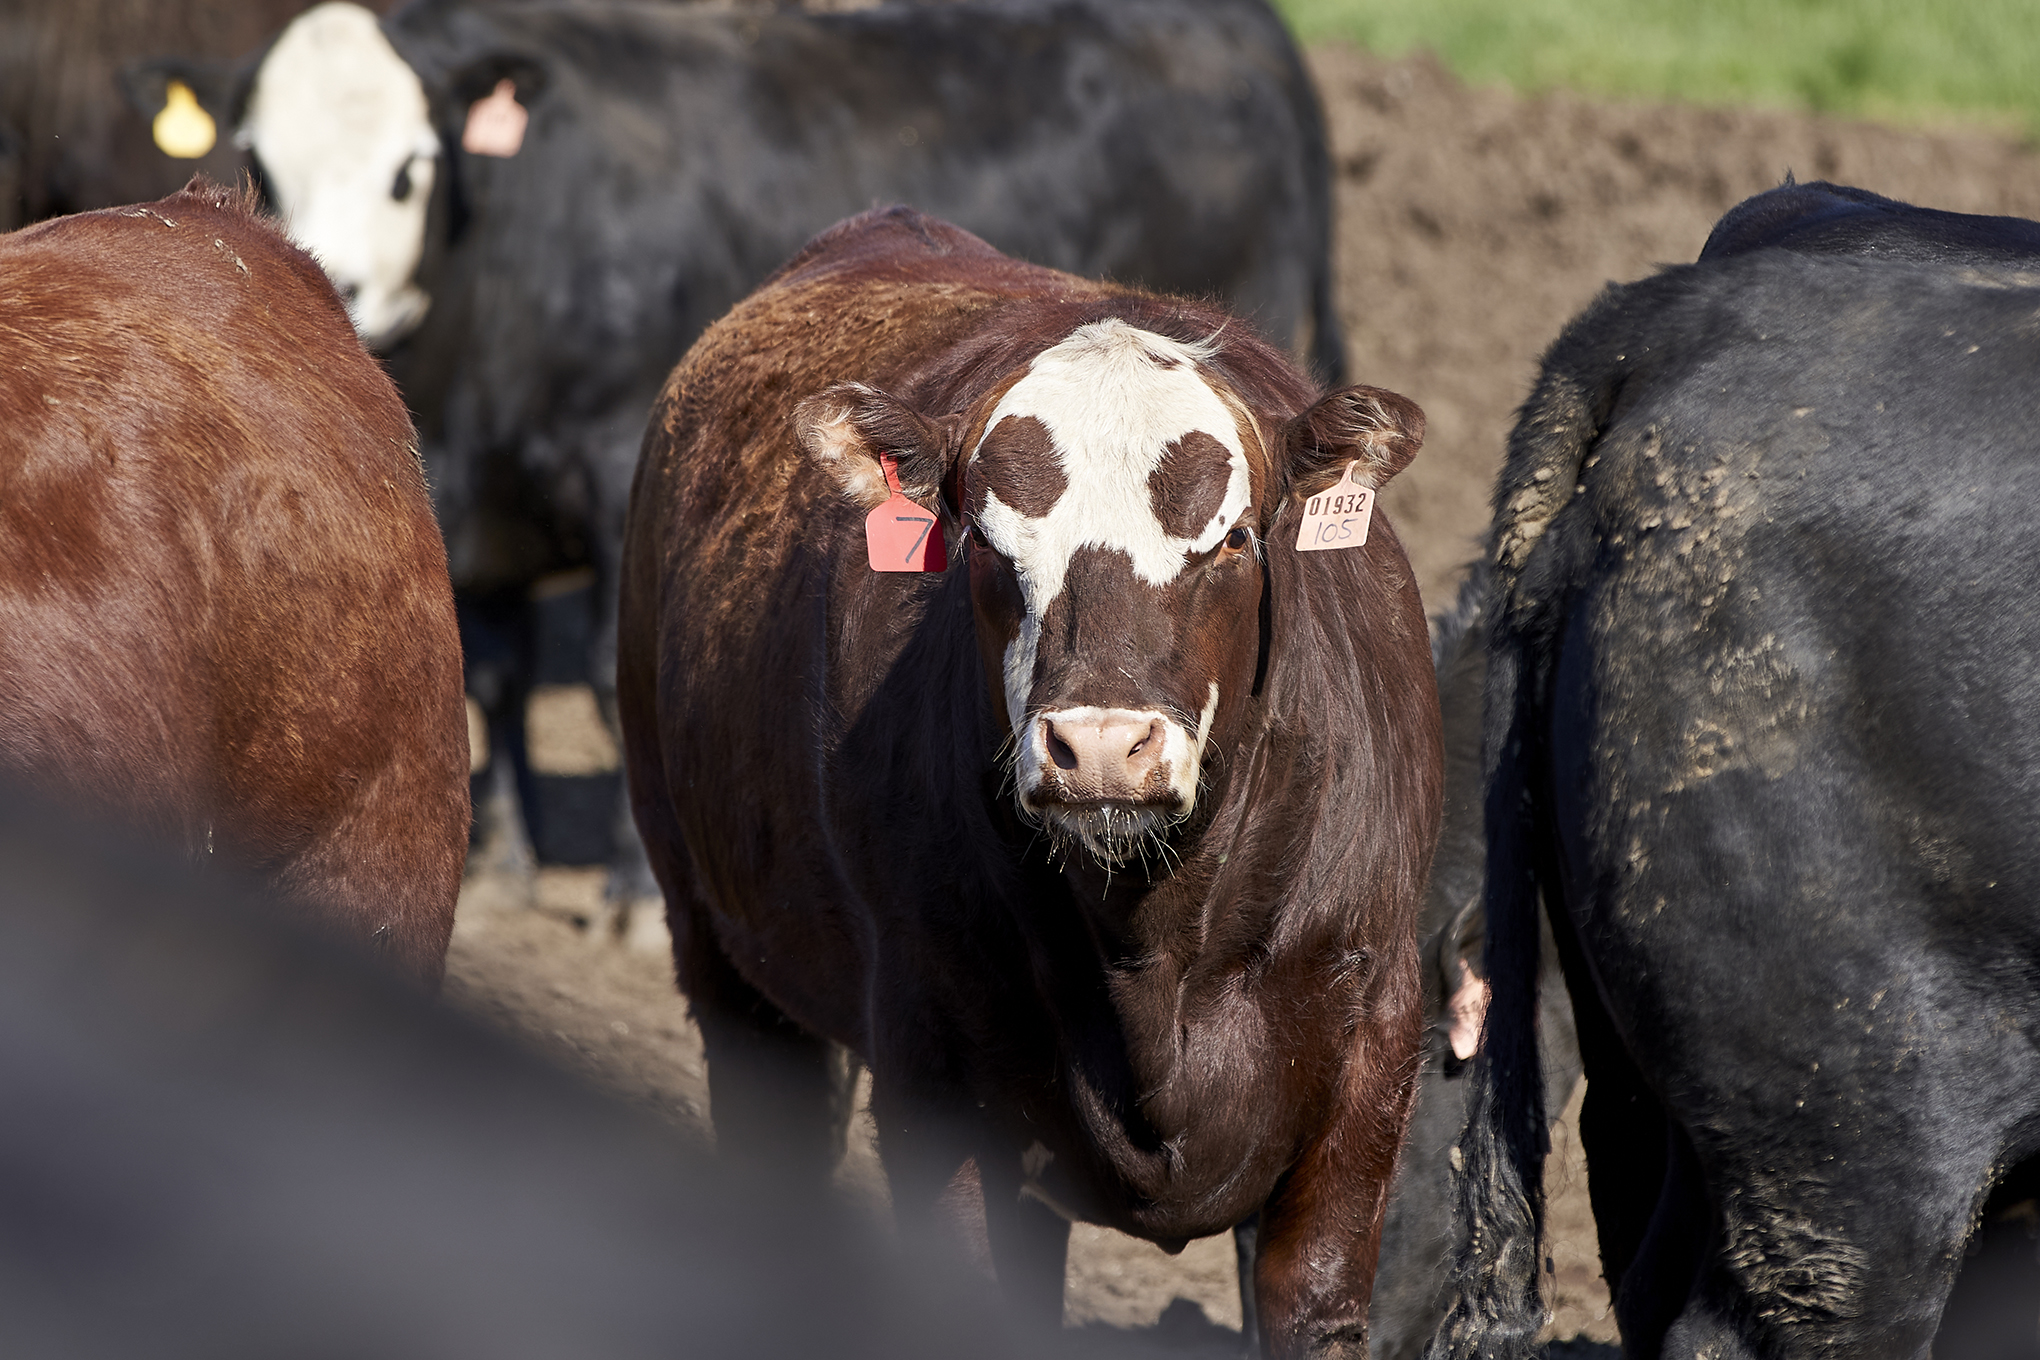 With drought impacting western US, Wisconsin cattle farmers could see higher demand, prices in coming months